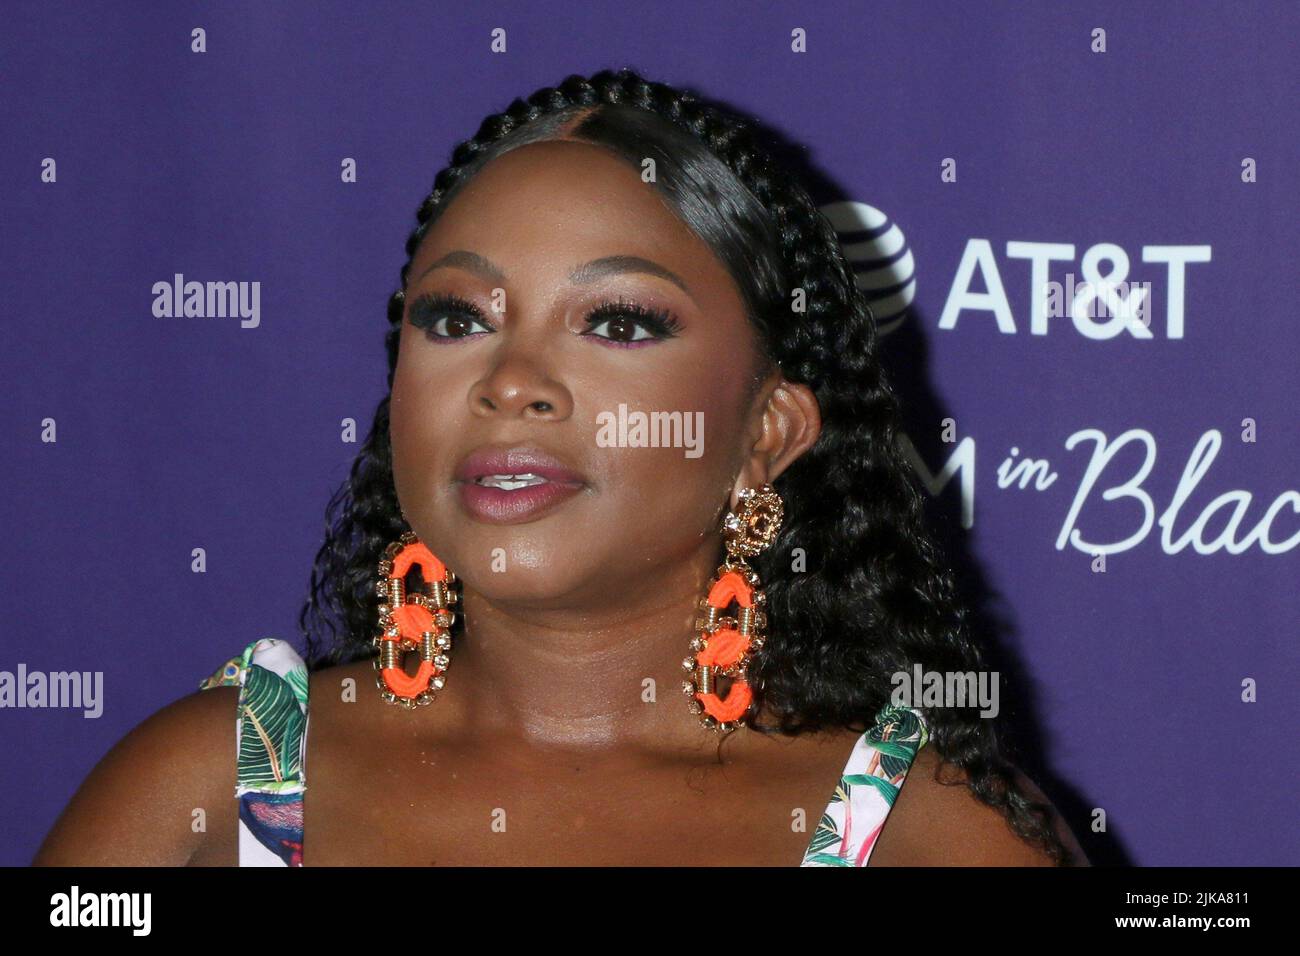 Los Angeles, CA. 31st July, 2022. Naturi Naughton at arrivals for Koshie Mills Presents Heirs Of Afrika 5th Annual International Women of Power Awards Luncheon, Sheraton Grand Los Angeles Hotel, Los Angeles, CA July 31, 2022. Credit: Priscilla Grant/Everett Collection/Alamy Live News Stock Photo